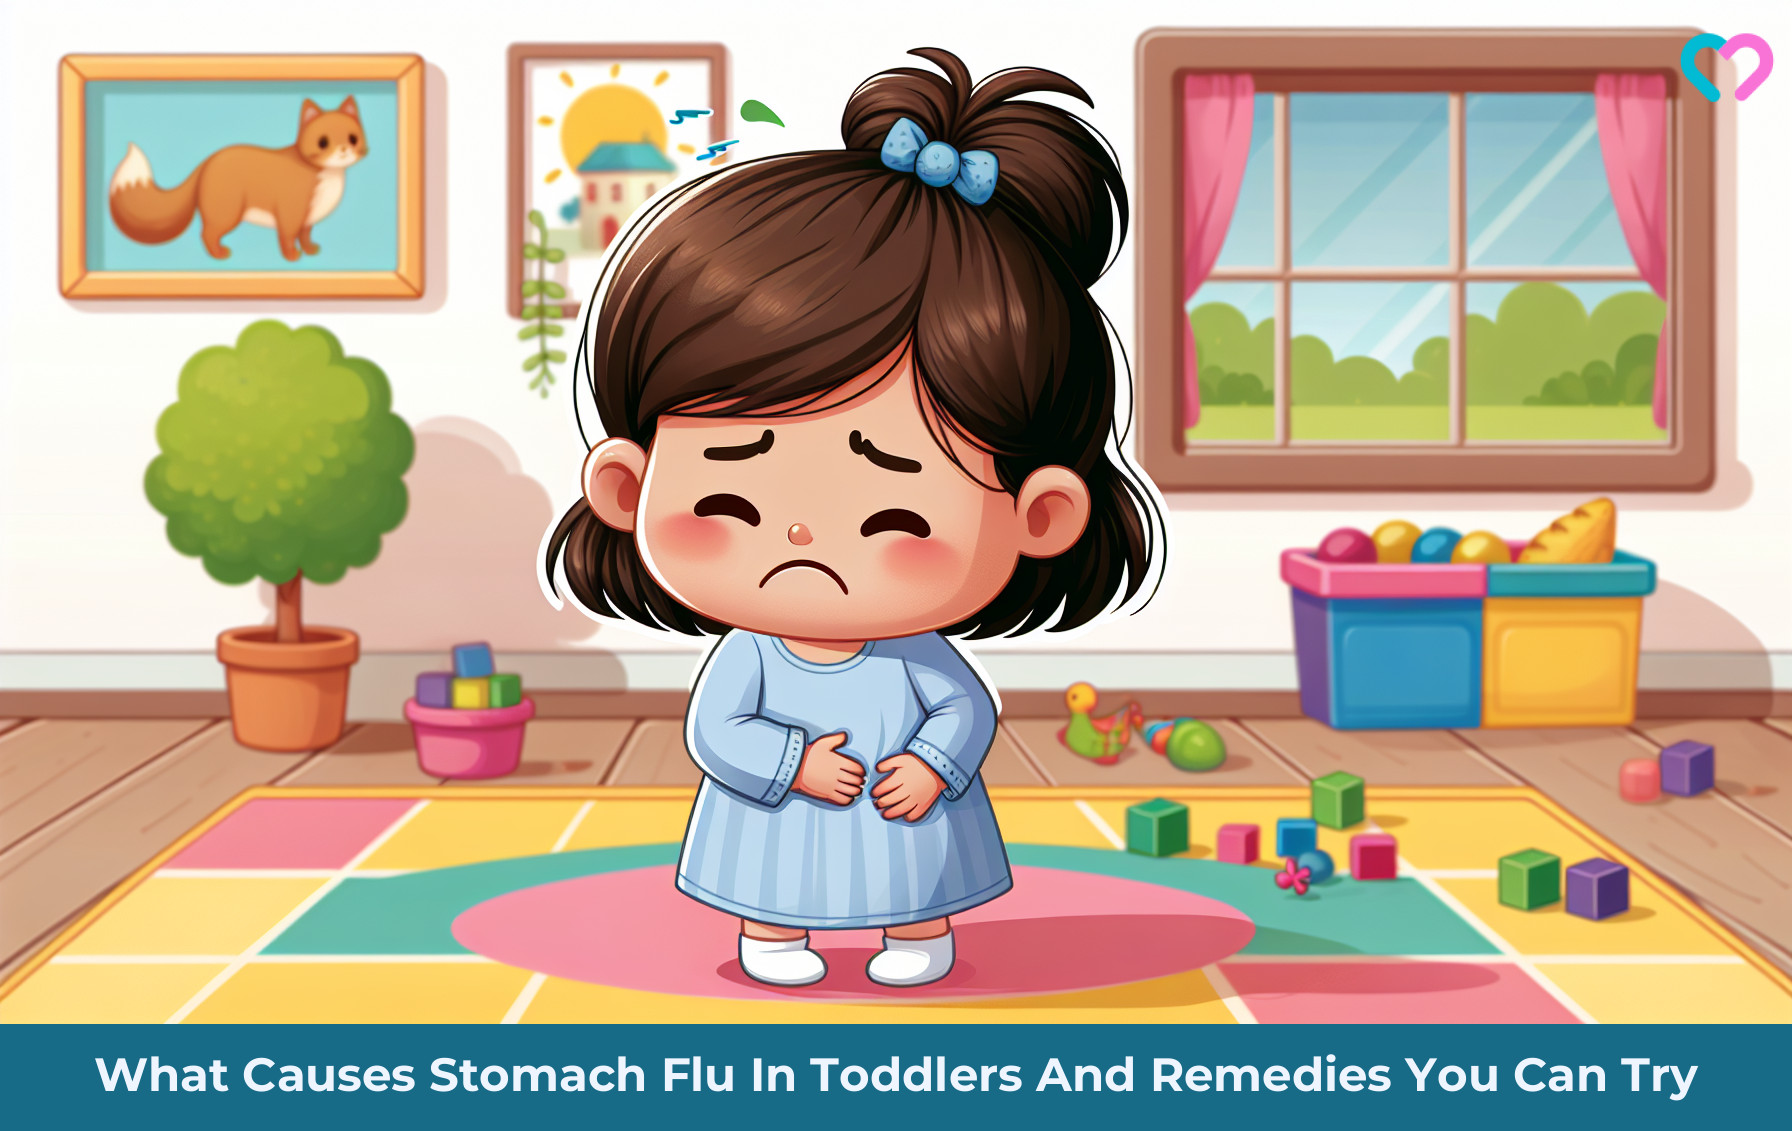 Stomach Flu In Toddlers_illustration